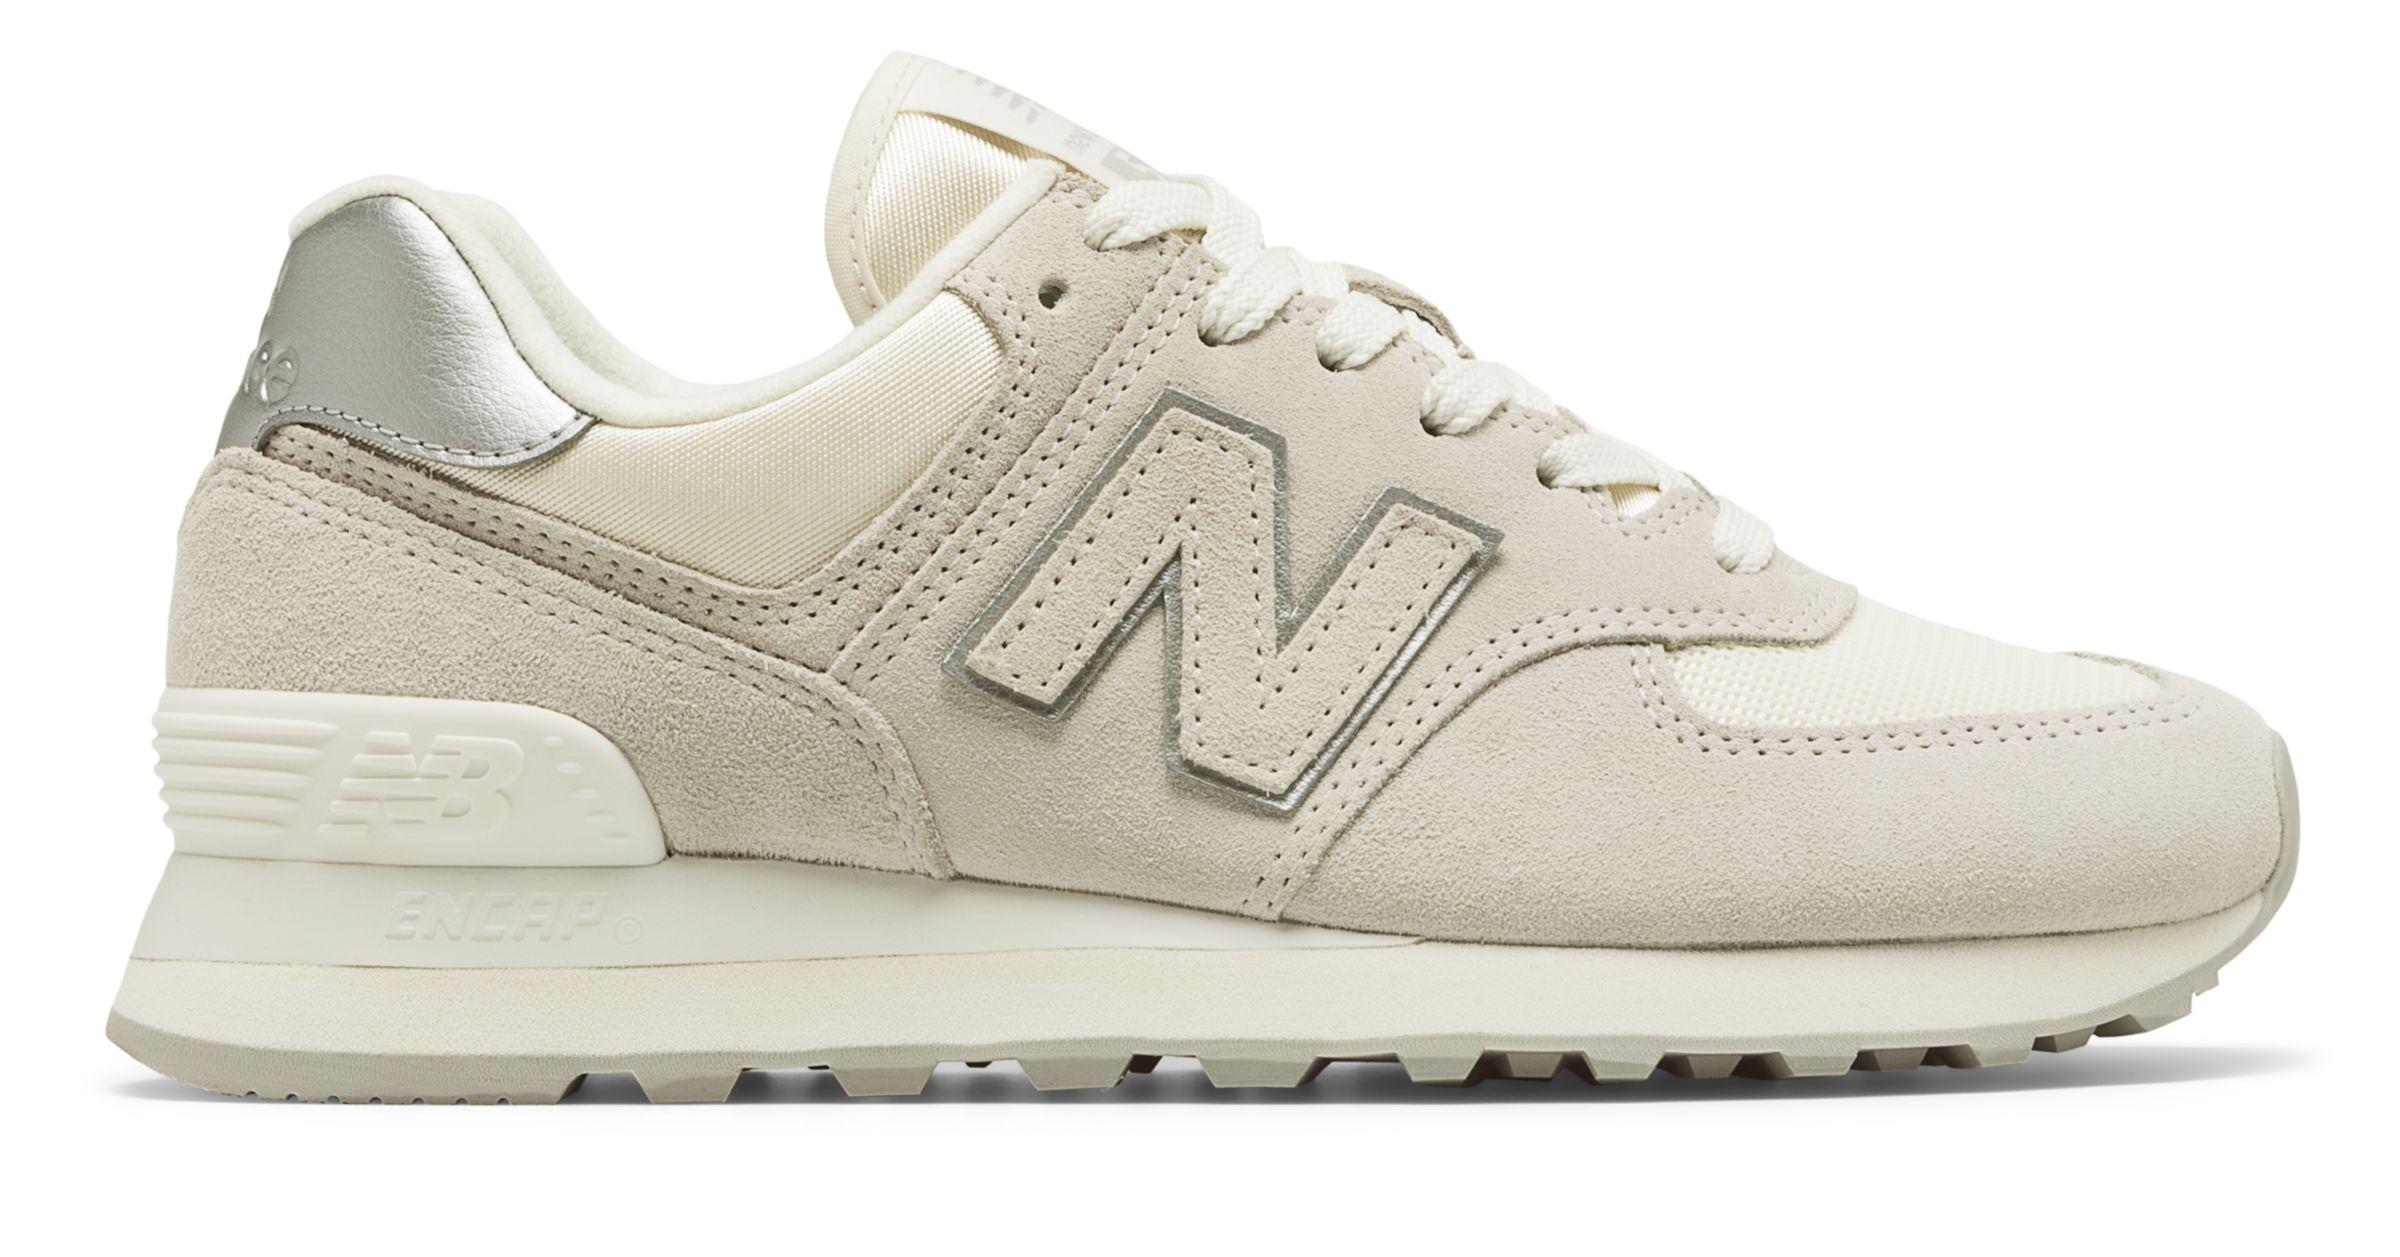 New Balance Rubber New Balance 574 Sateen Tab Shoes in Metallic - Lyst